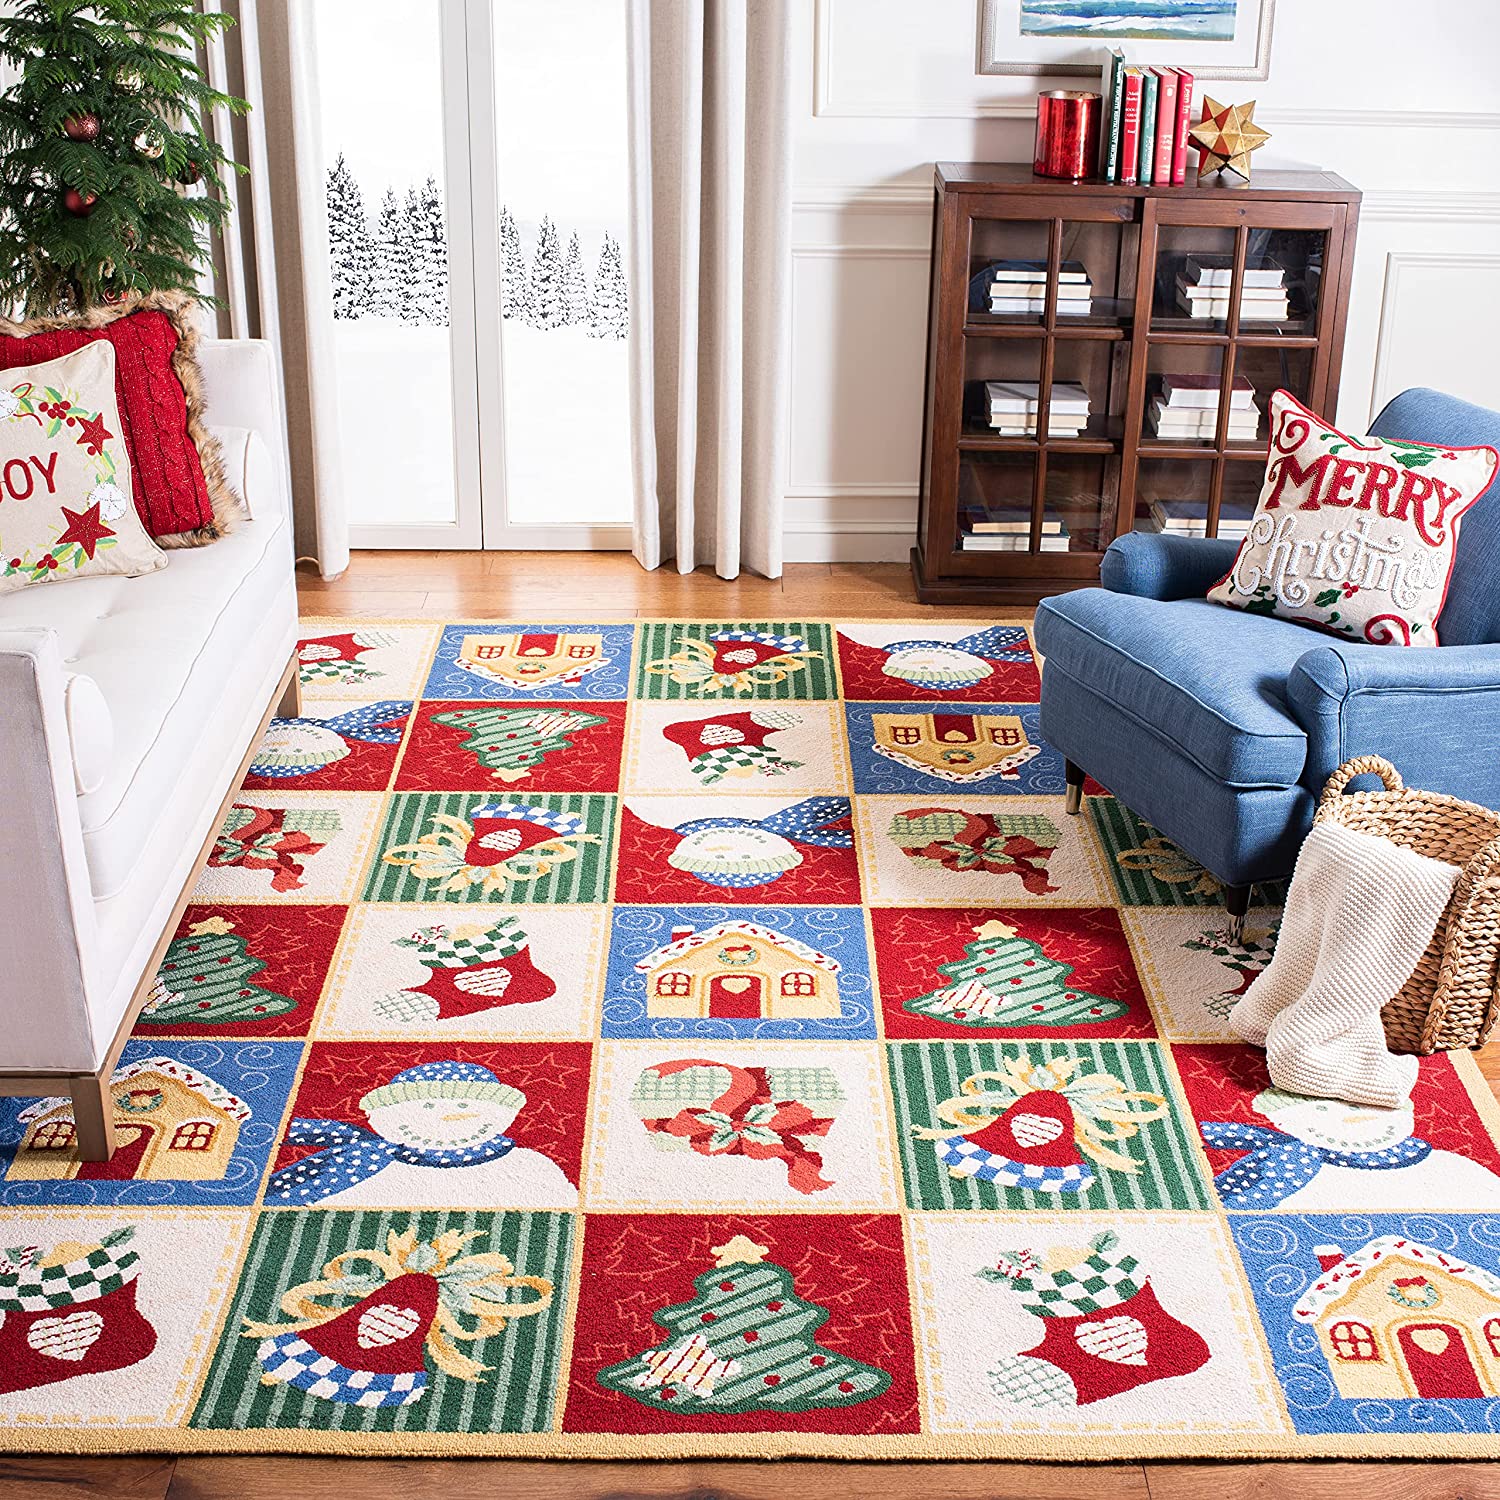 Safavieh Chelsea Collection Hand-Hooked Christmas Novelty Wool Area Rug